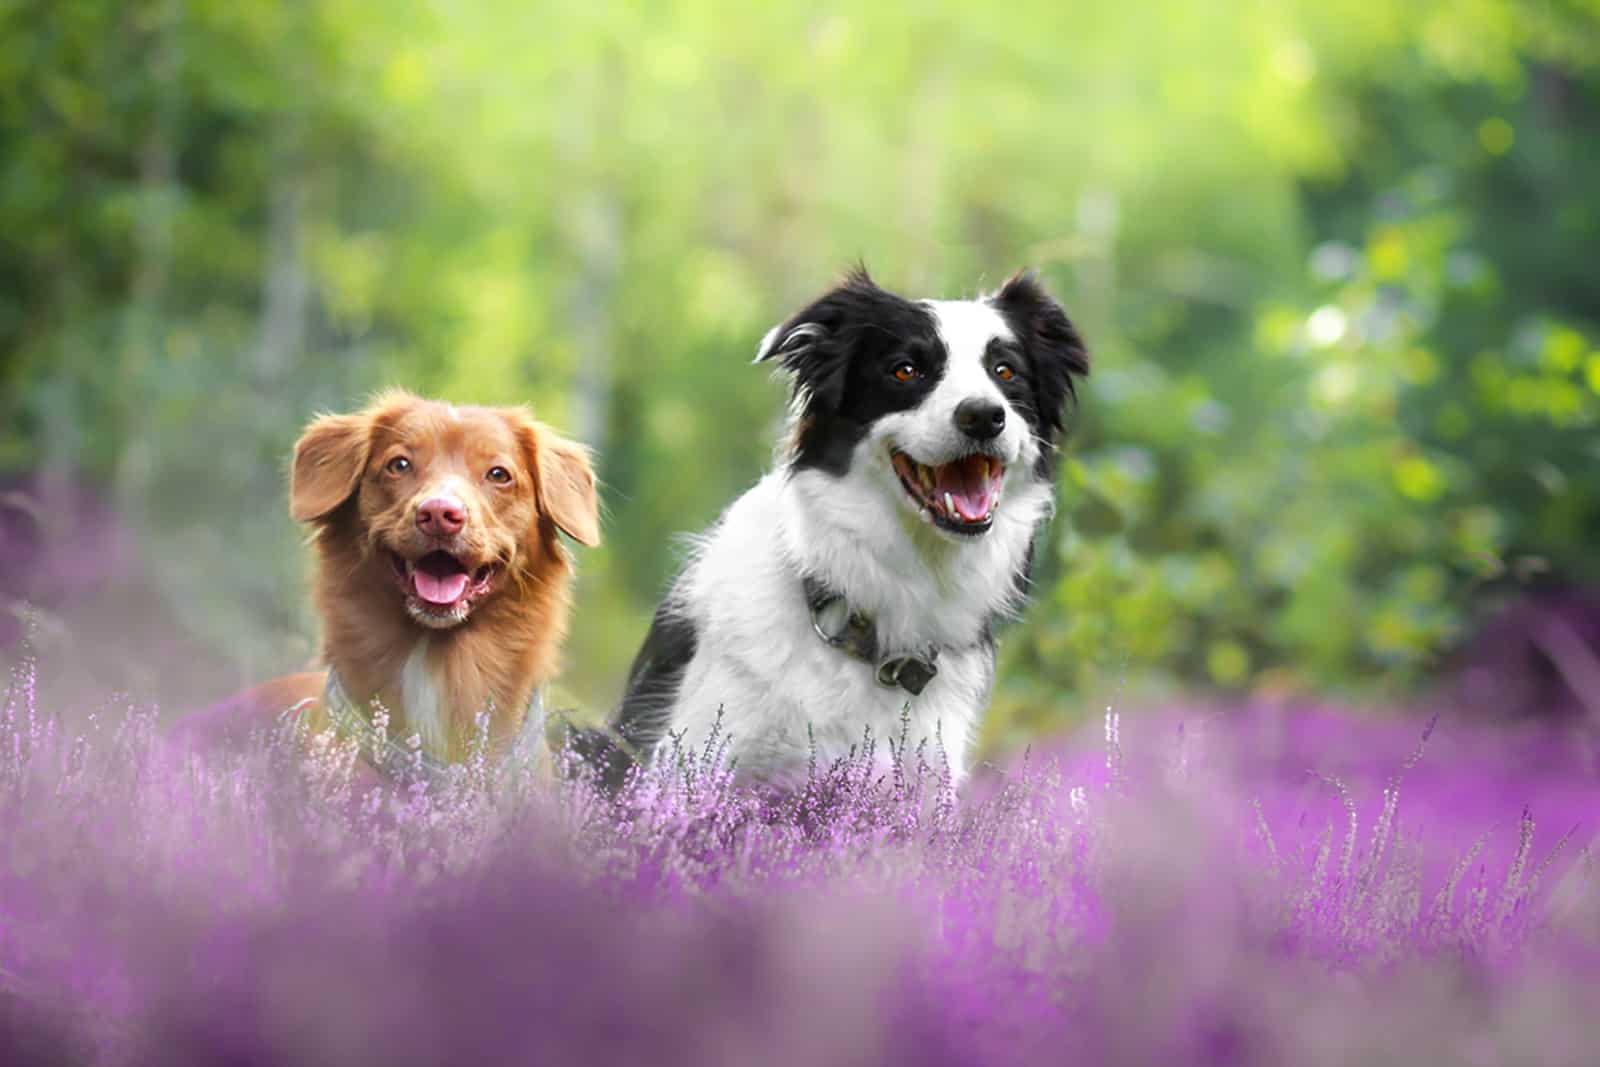 Nova scotia duck tolling retriever and border collie in a forest